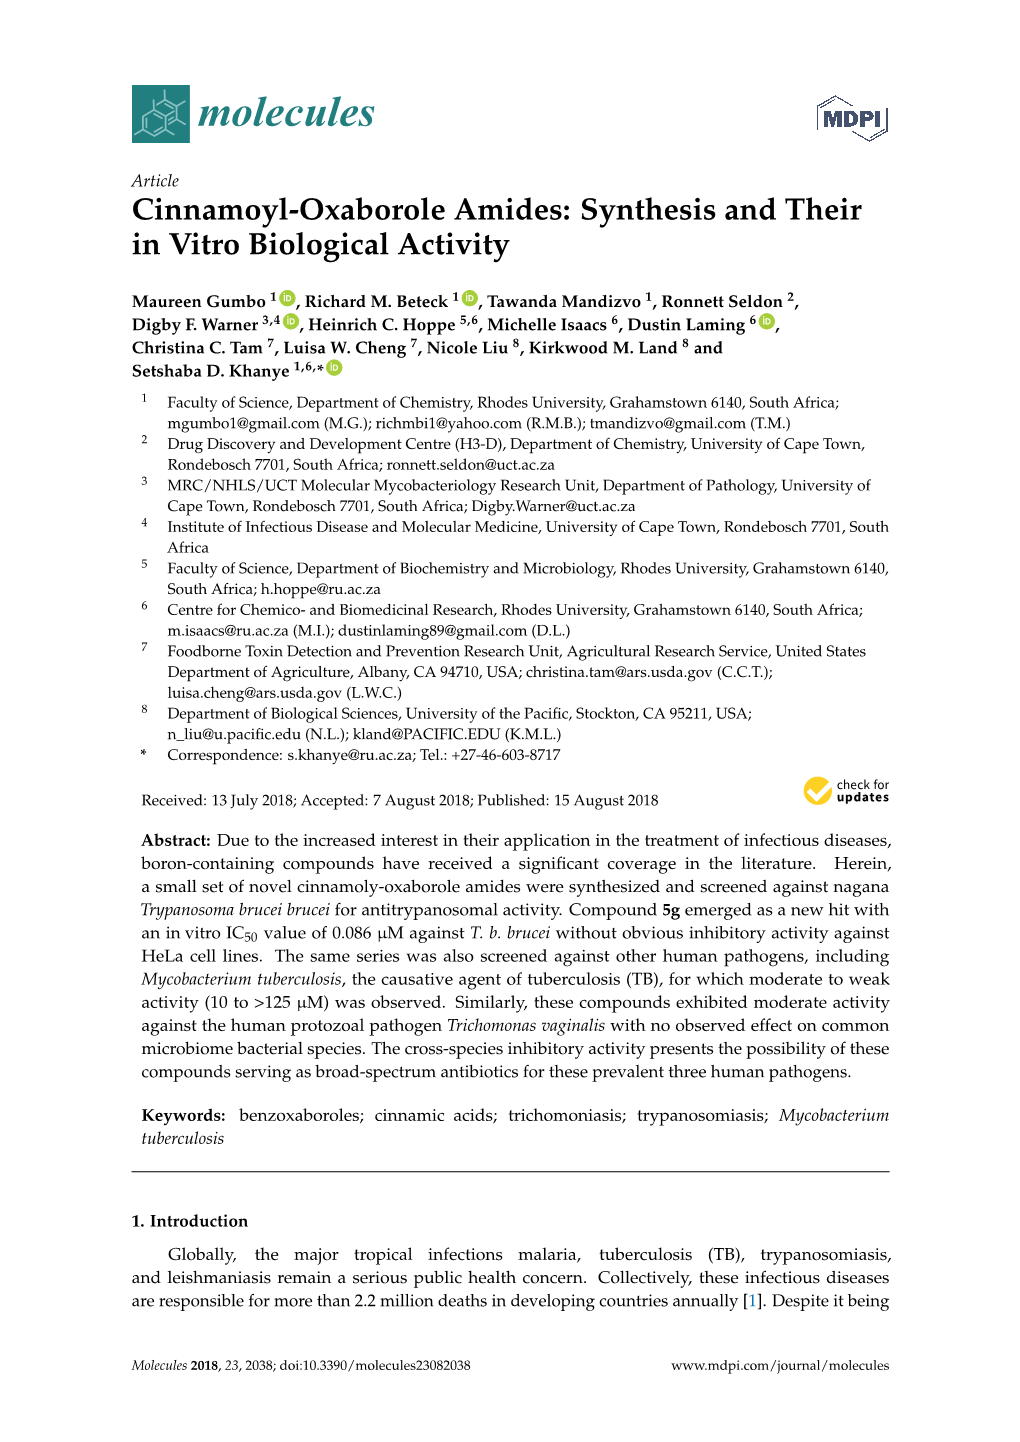 Cinnamoyl-Oxaborole Amides: Synthesis and Their in Vitro Biological Activity